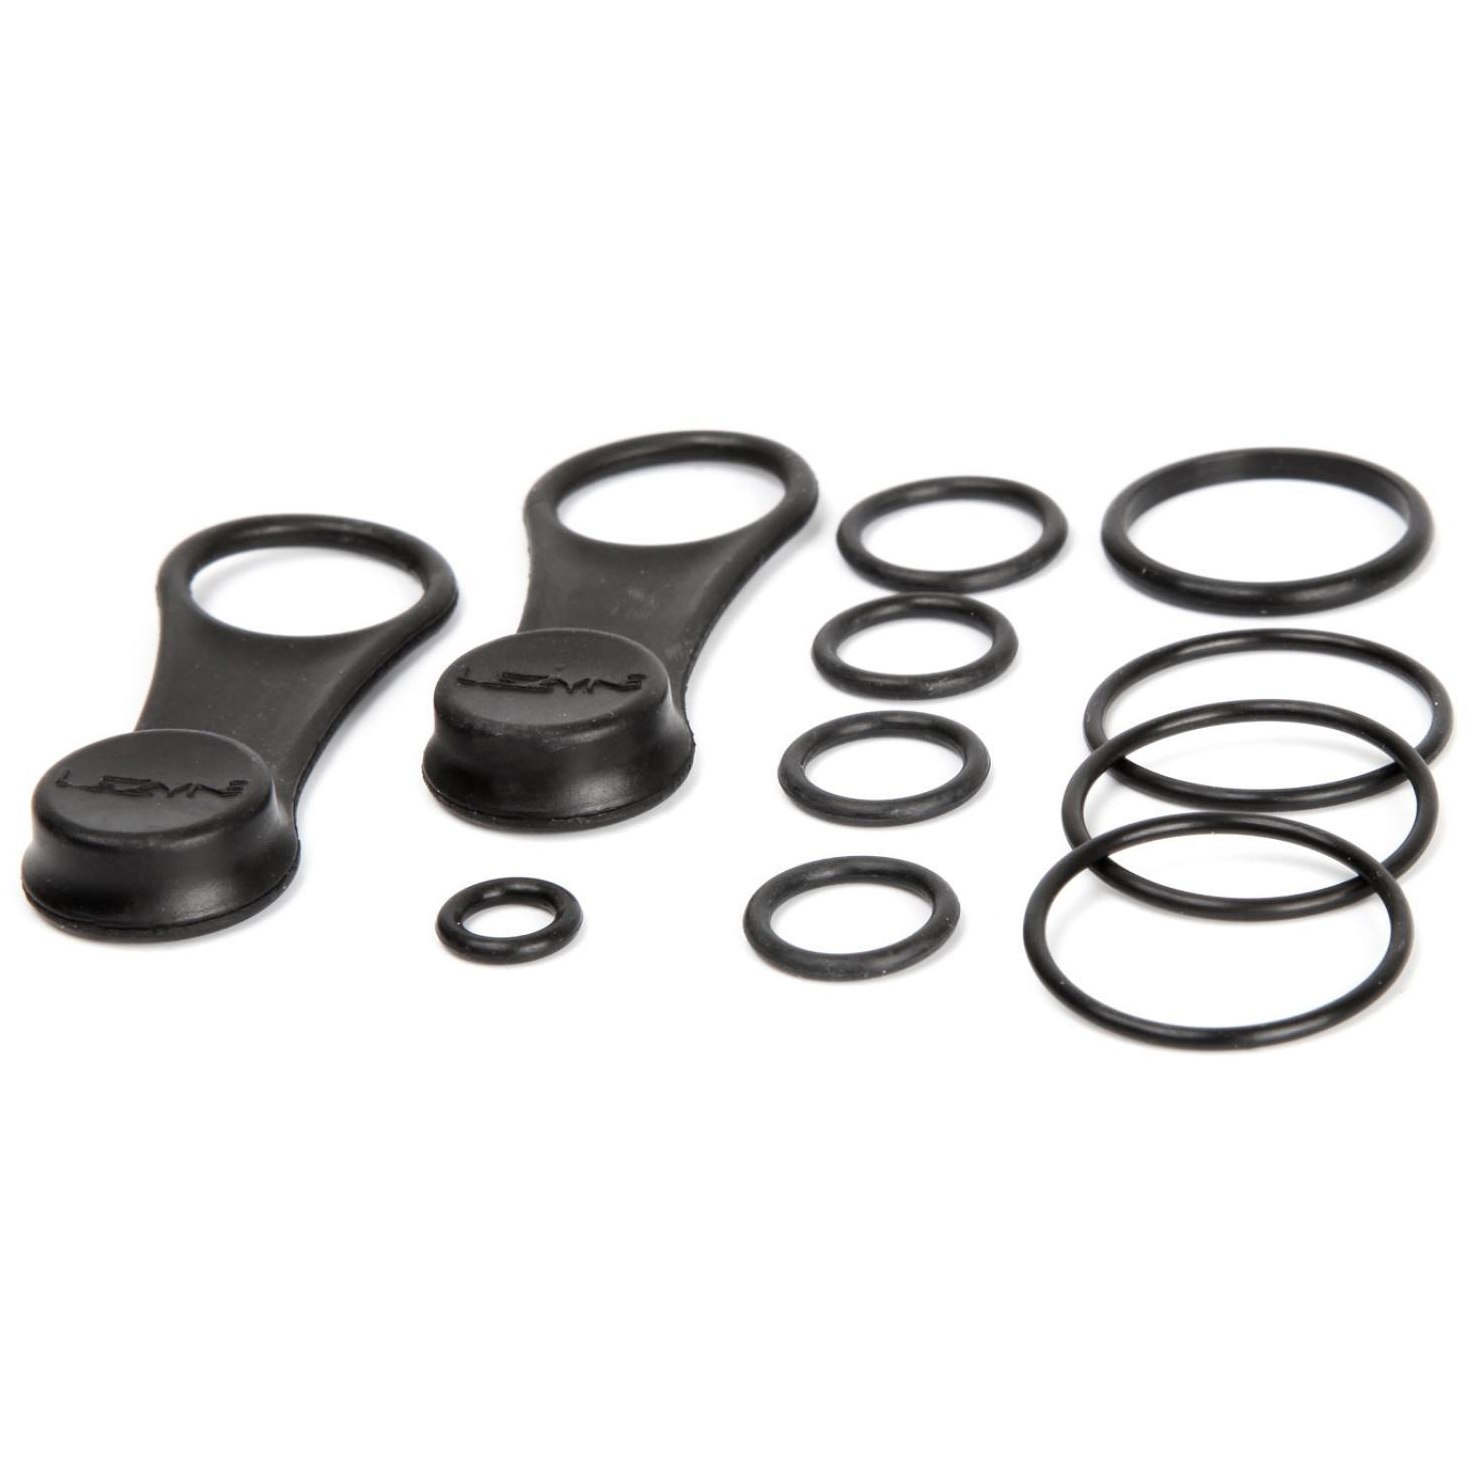 Picture of Lezyne Seal Kit for Alloy Drive Pump